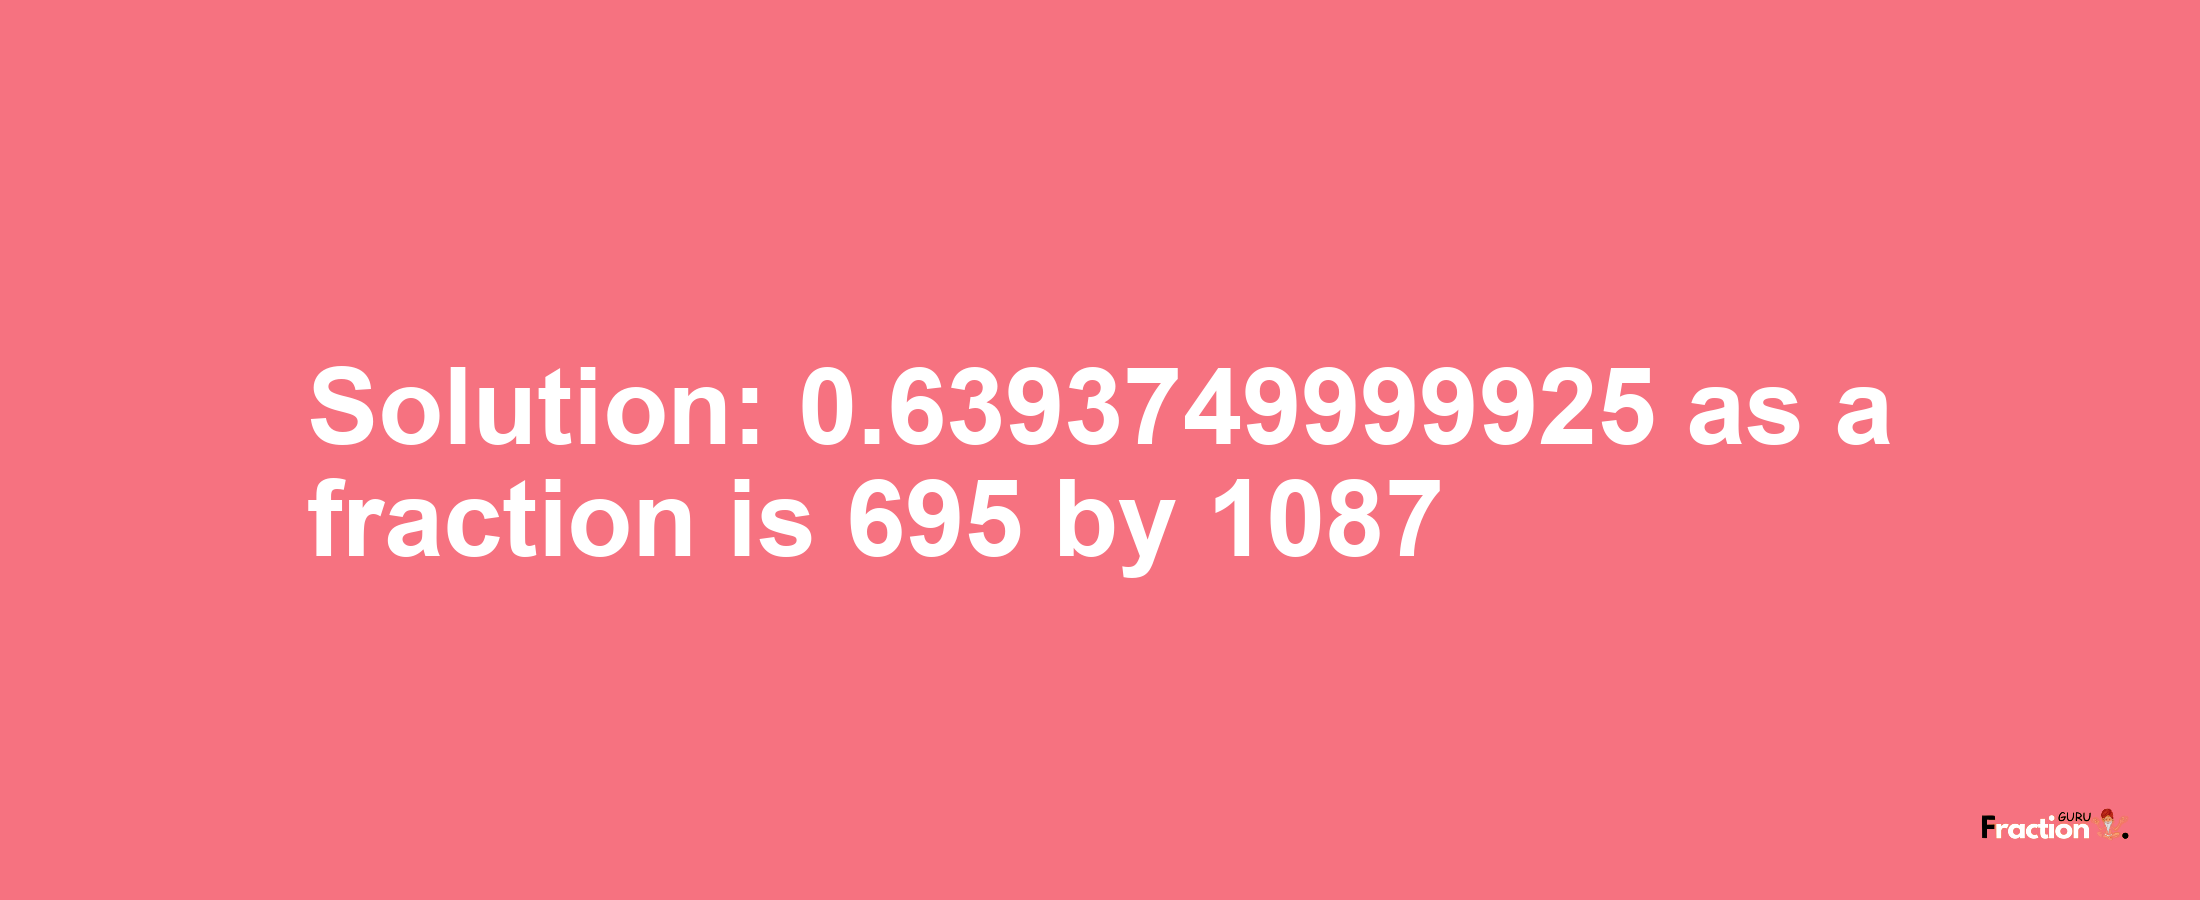 Solution:0.6393749999925 as a fraction is 695/1087